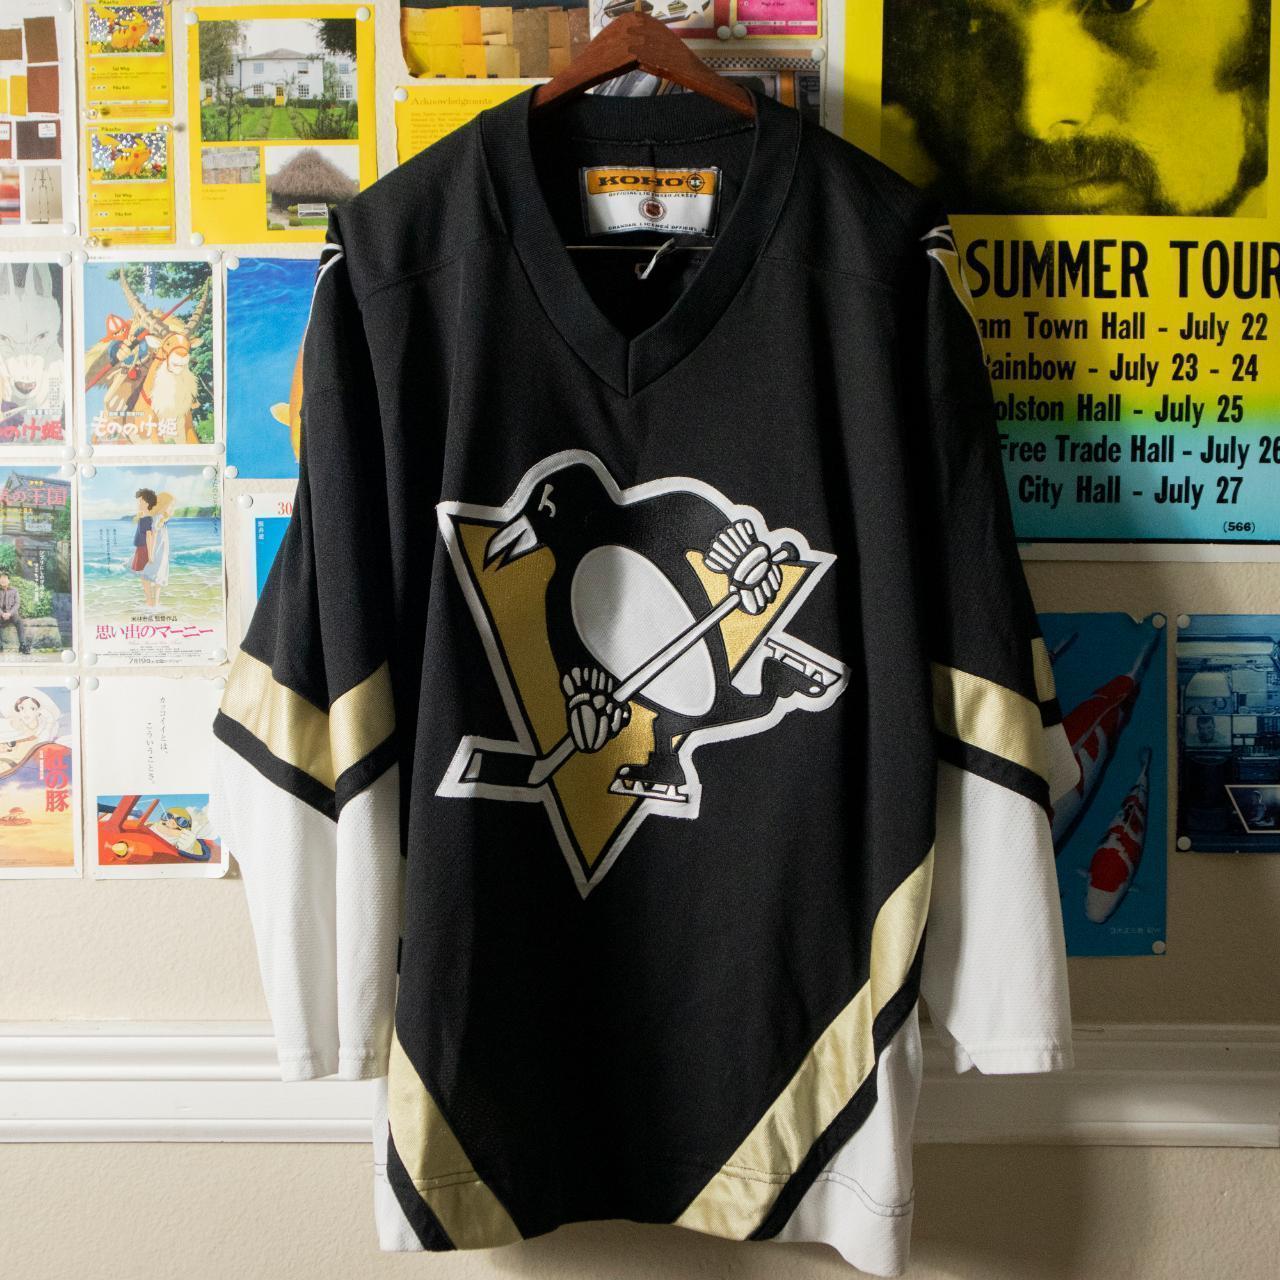 Penguins' new third jersey is a '90s throwback